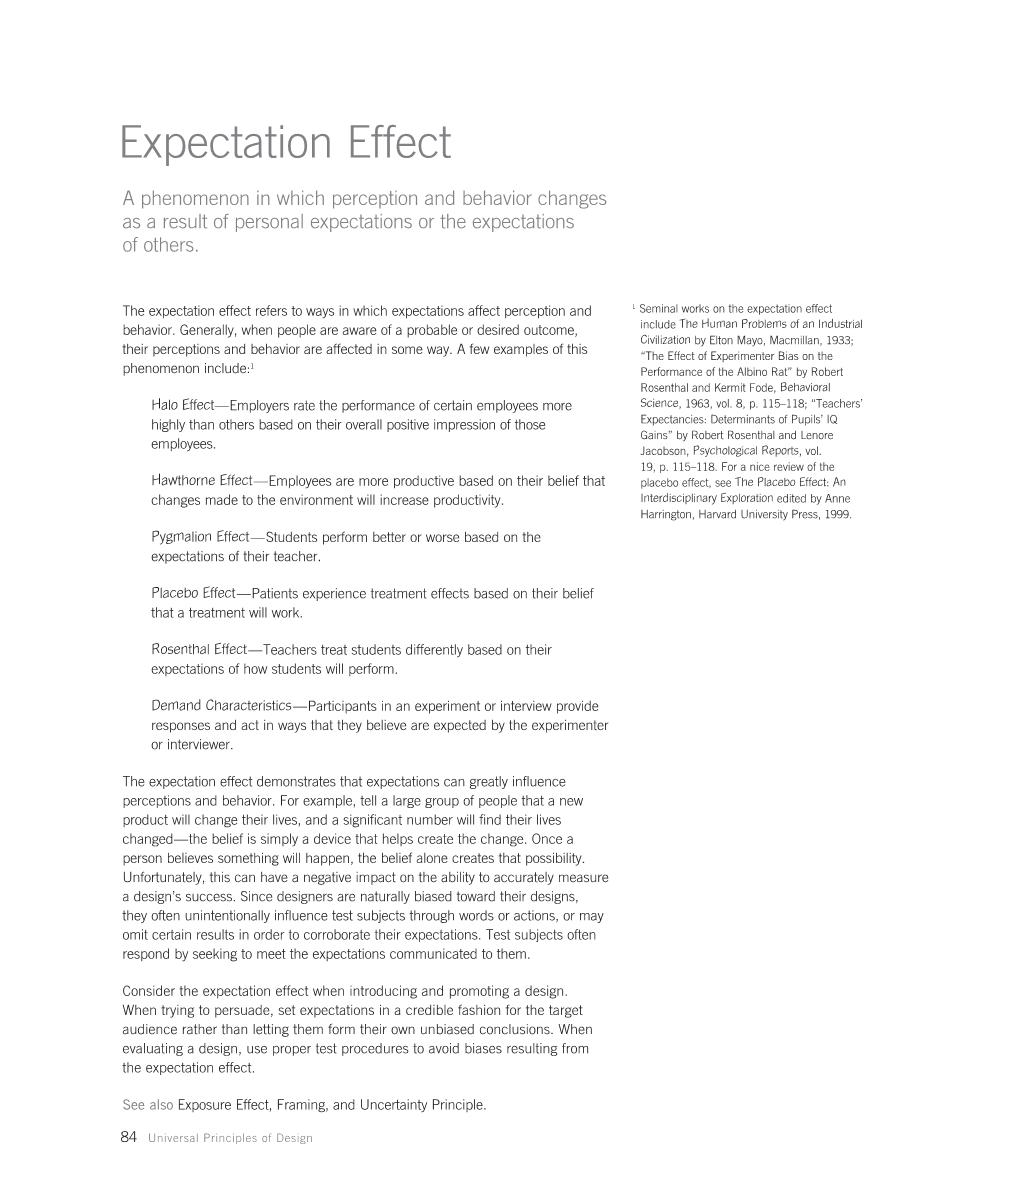 Expectation Effect